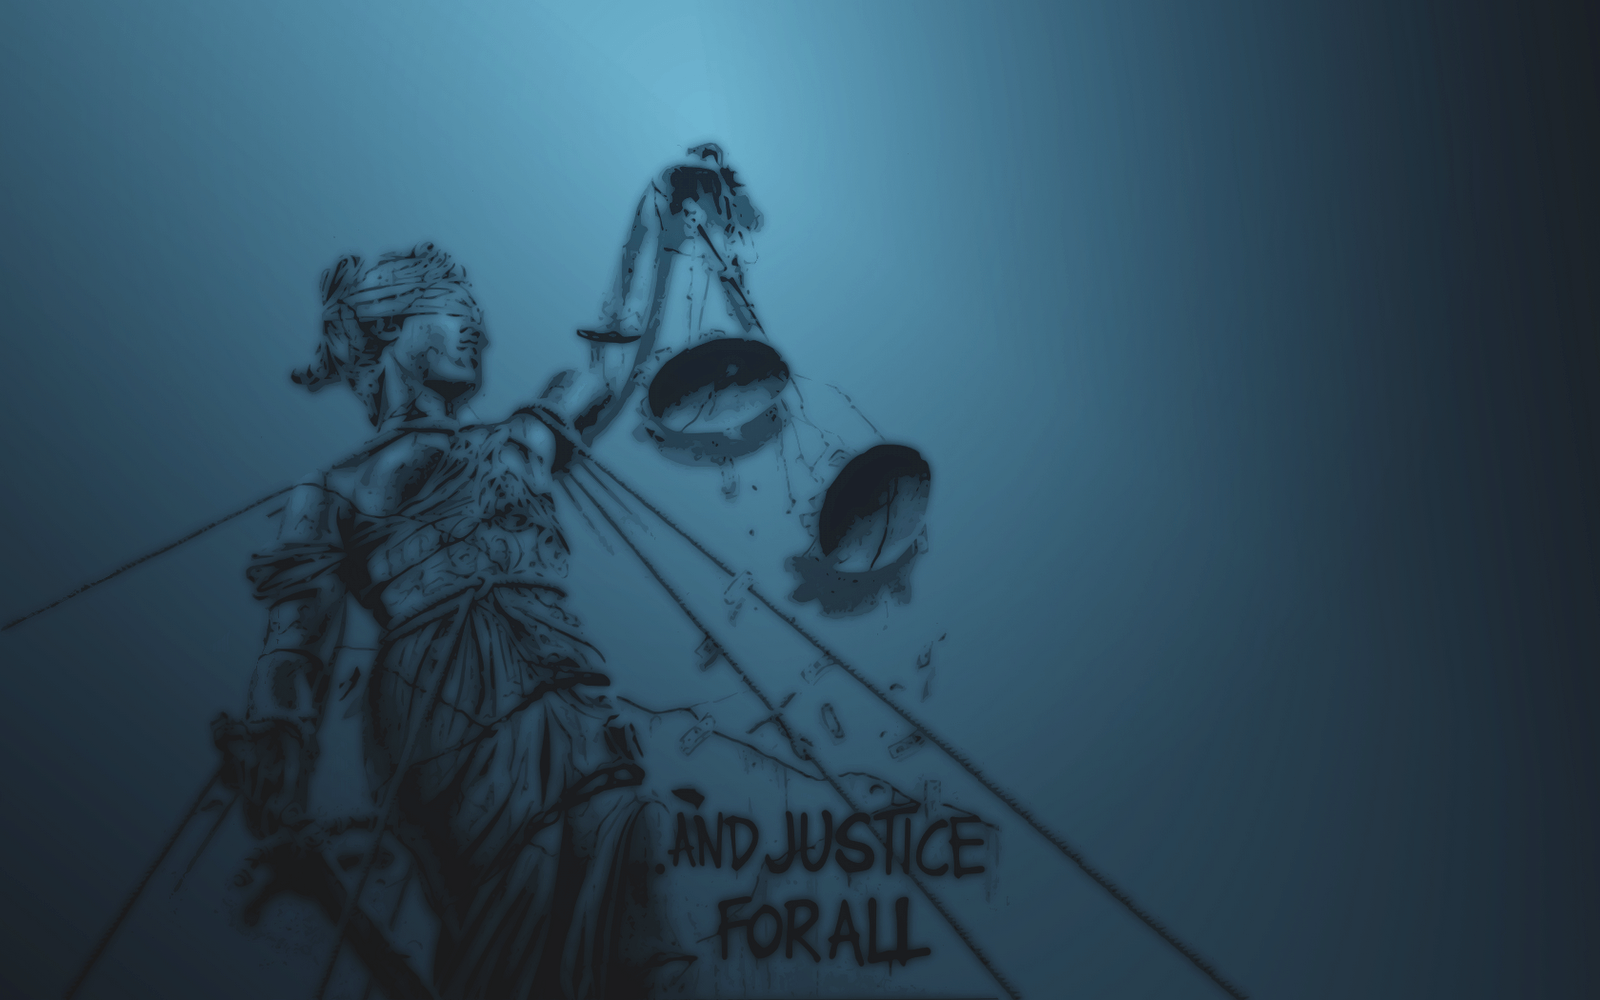 Metallica And Justice For All Wallpapers  Wallpaper Cave